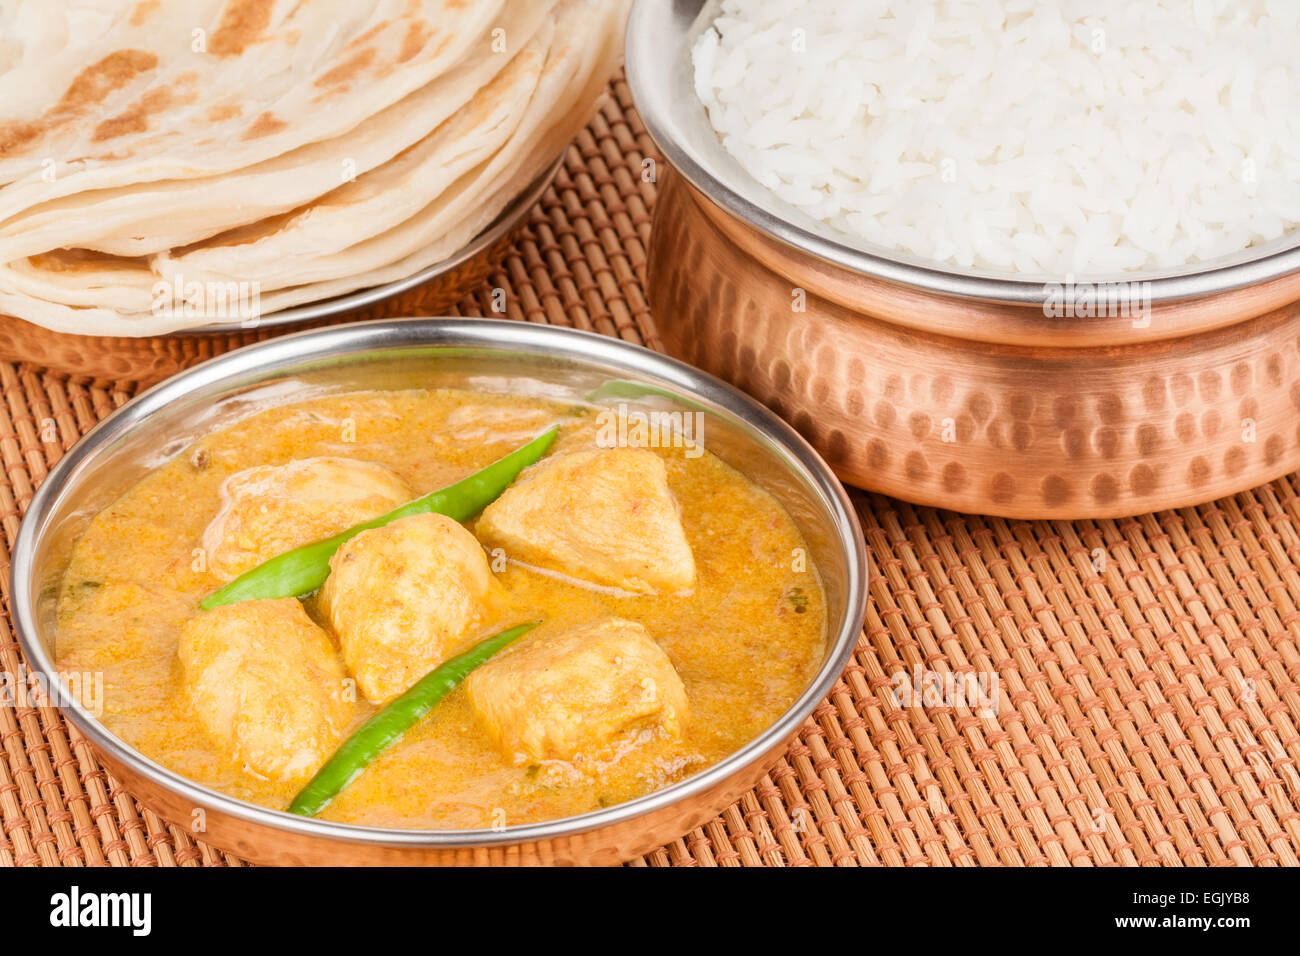 Indian chicken curry meal with rice & parotta (Indian bread) served in authentic copper utensils. Green chilli used as garnish. Stock Photo